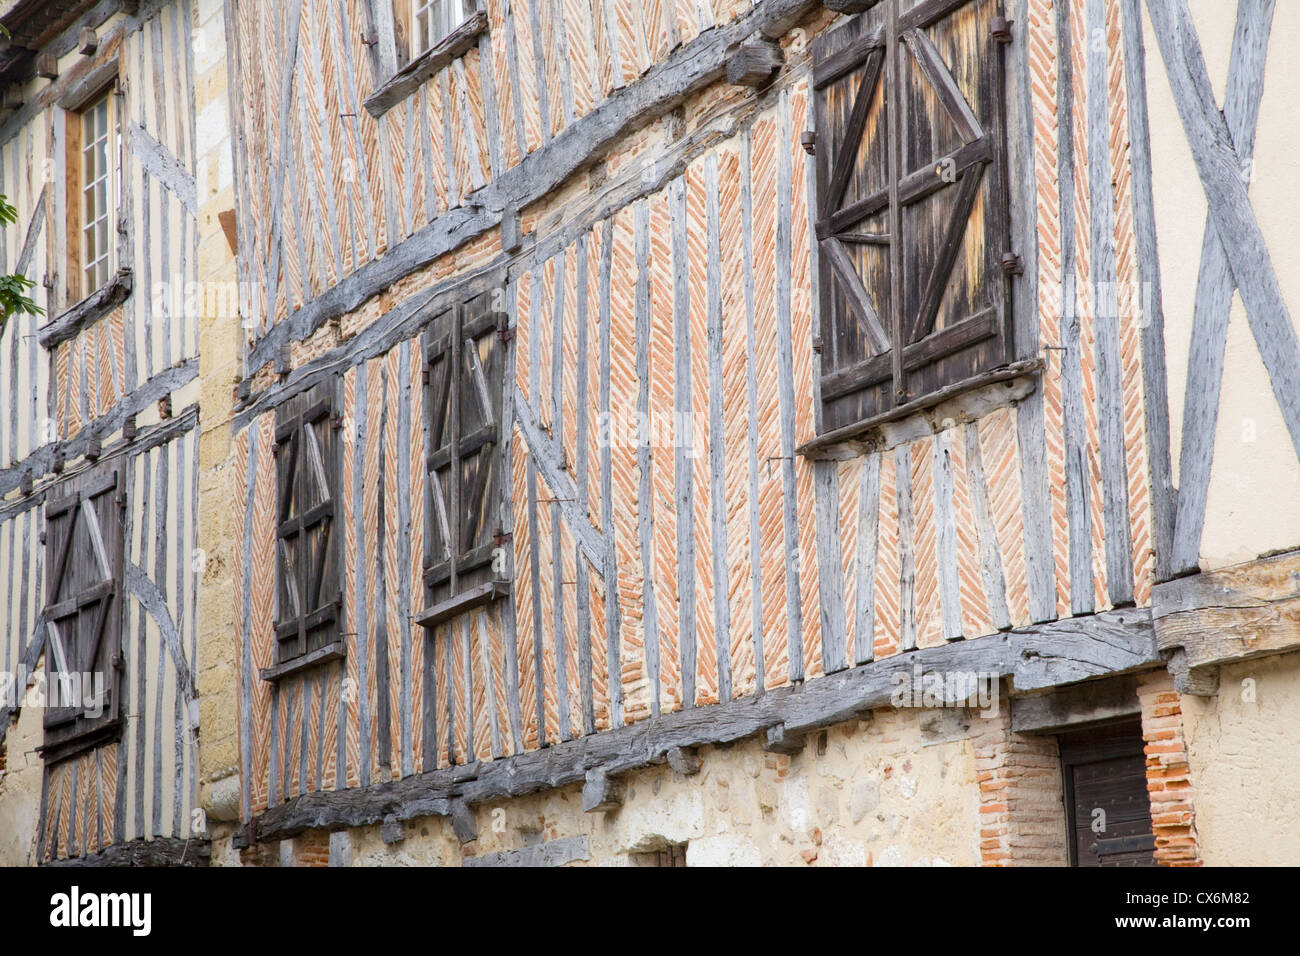 Half-timbered houses in Bergerac, Dordogne, France Stock Photo